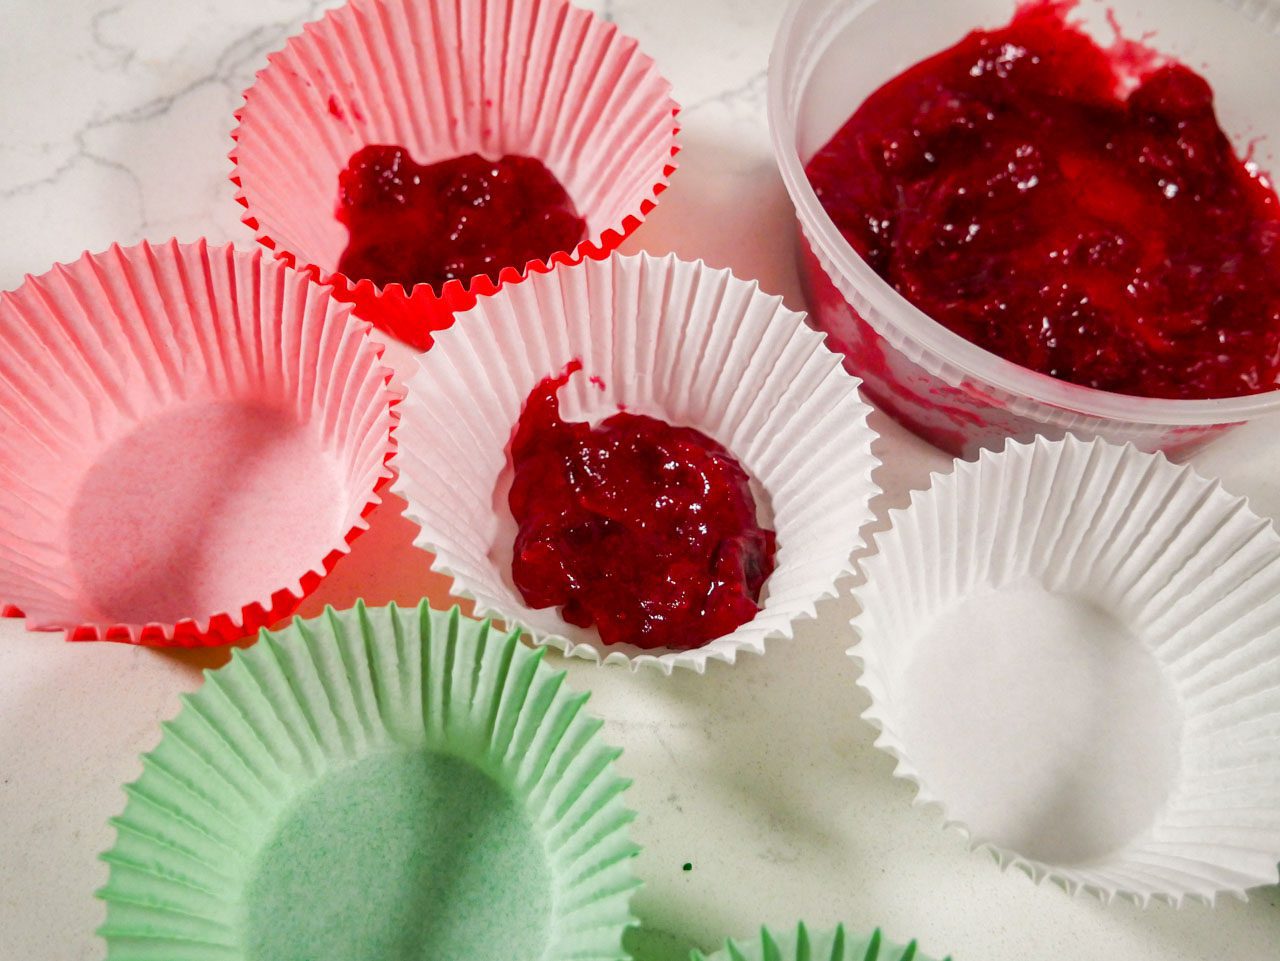 Cranberry sauce in cupcake liners